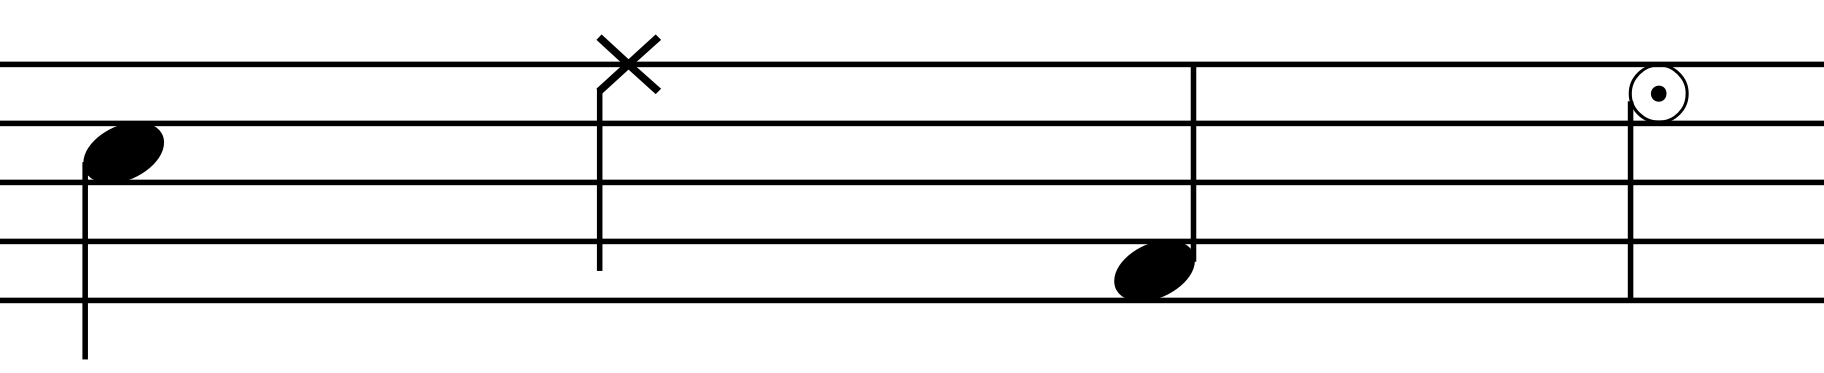 An example of commonly used note heads in drum kit notation